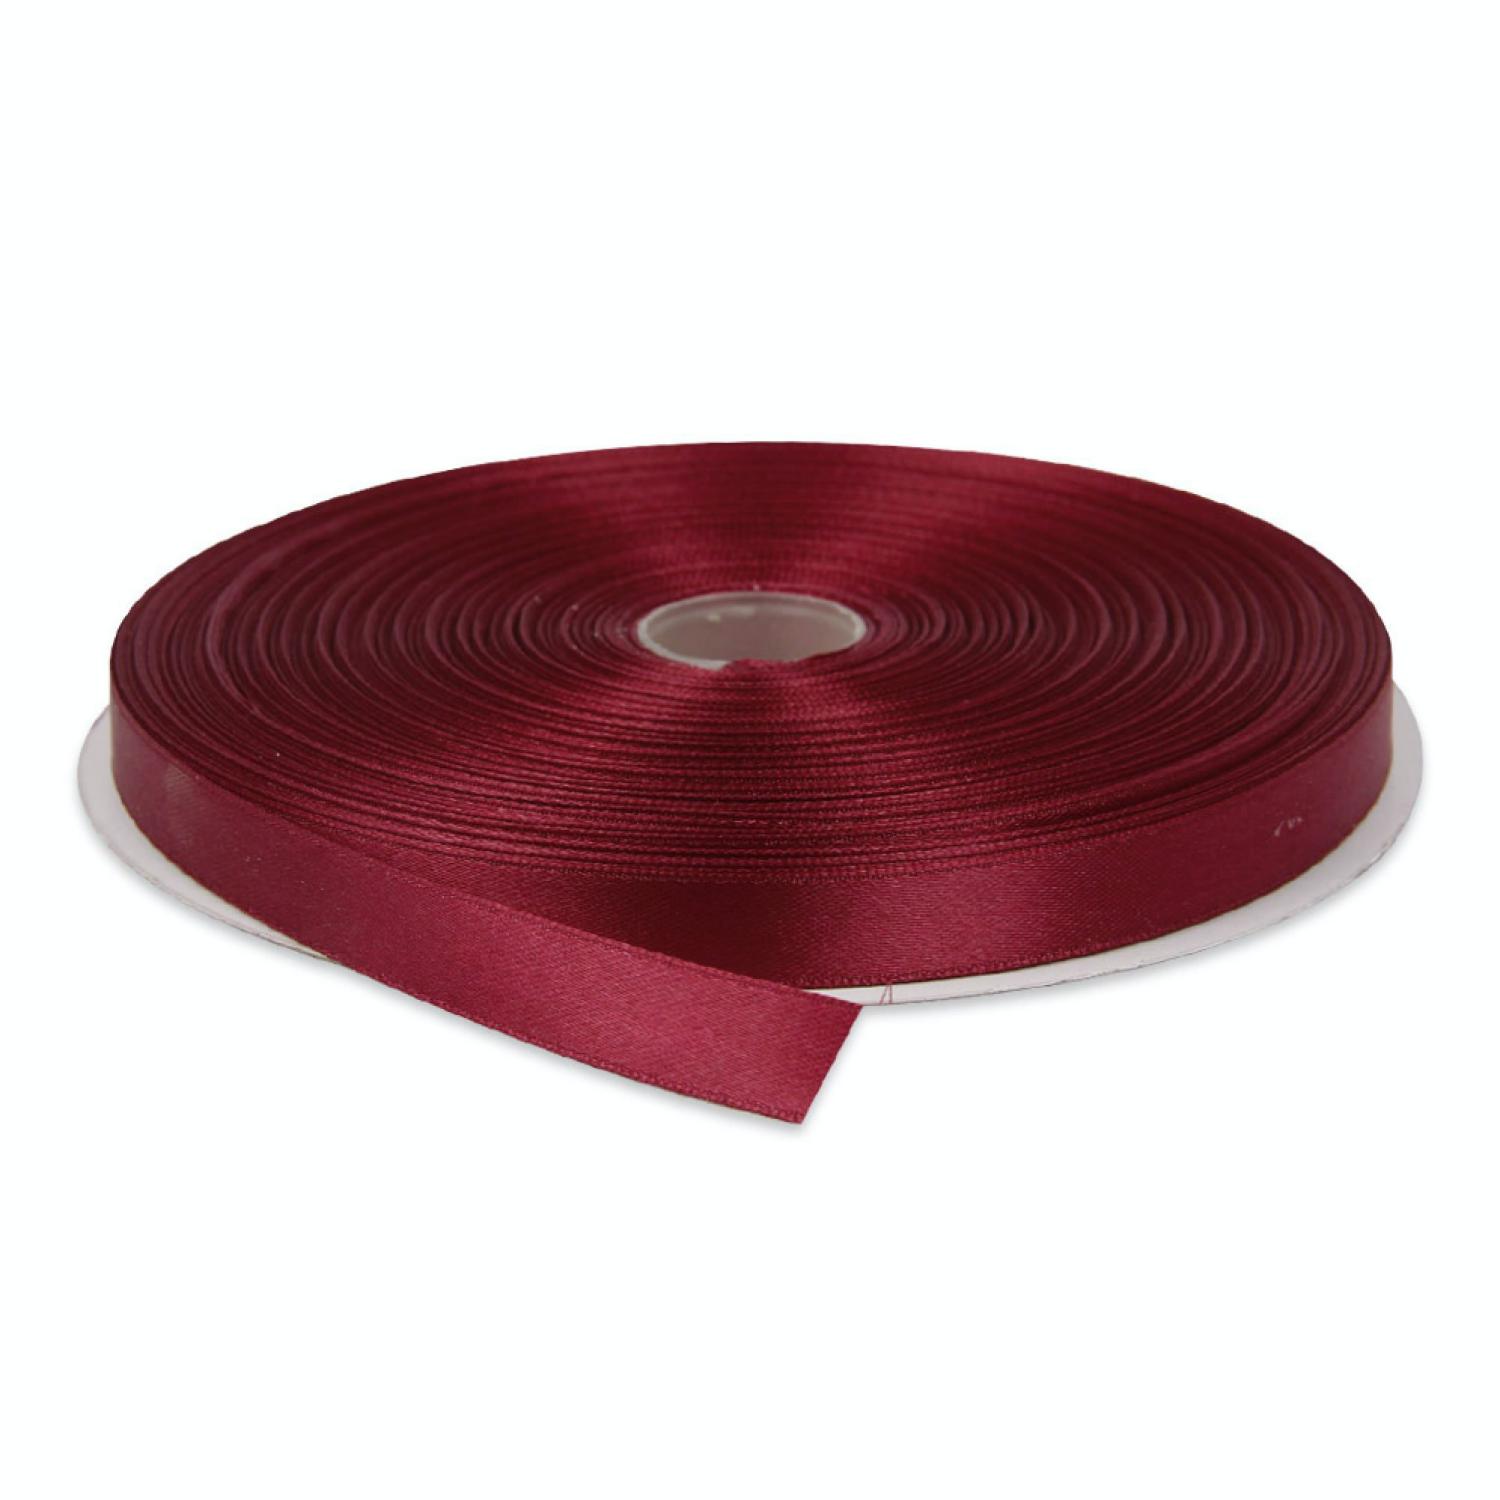 Topenca Supplies 1/2 Inches x 50 Yards Double Face Solid Satin Ribbon Roll  Burgundy 1/2 x 50 yards Burgundy